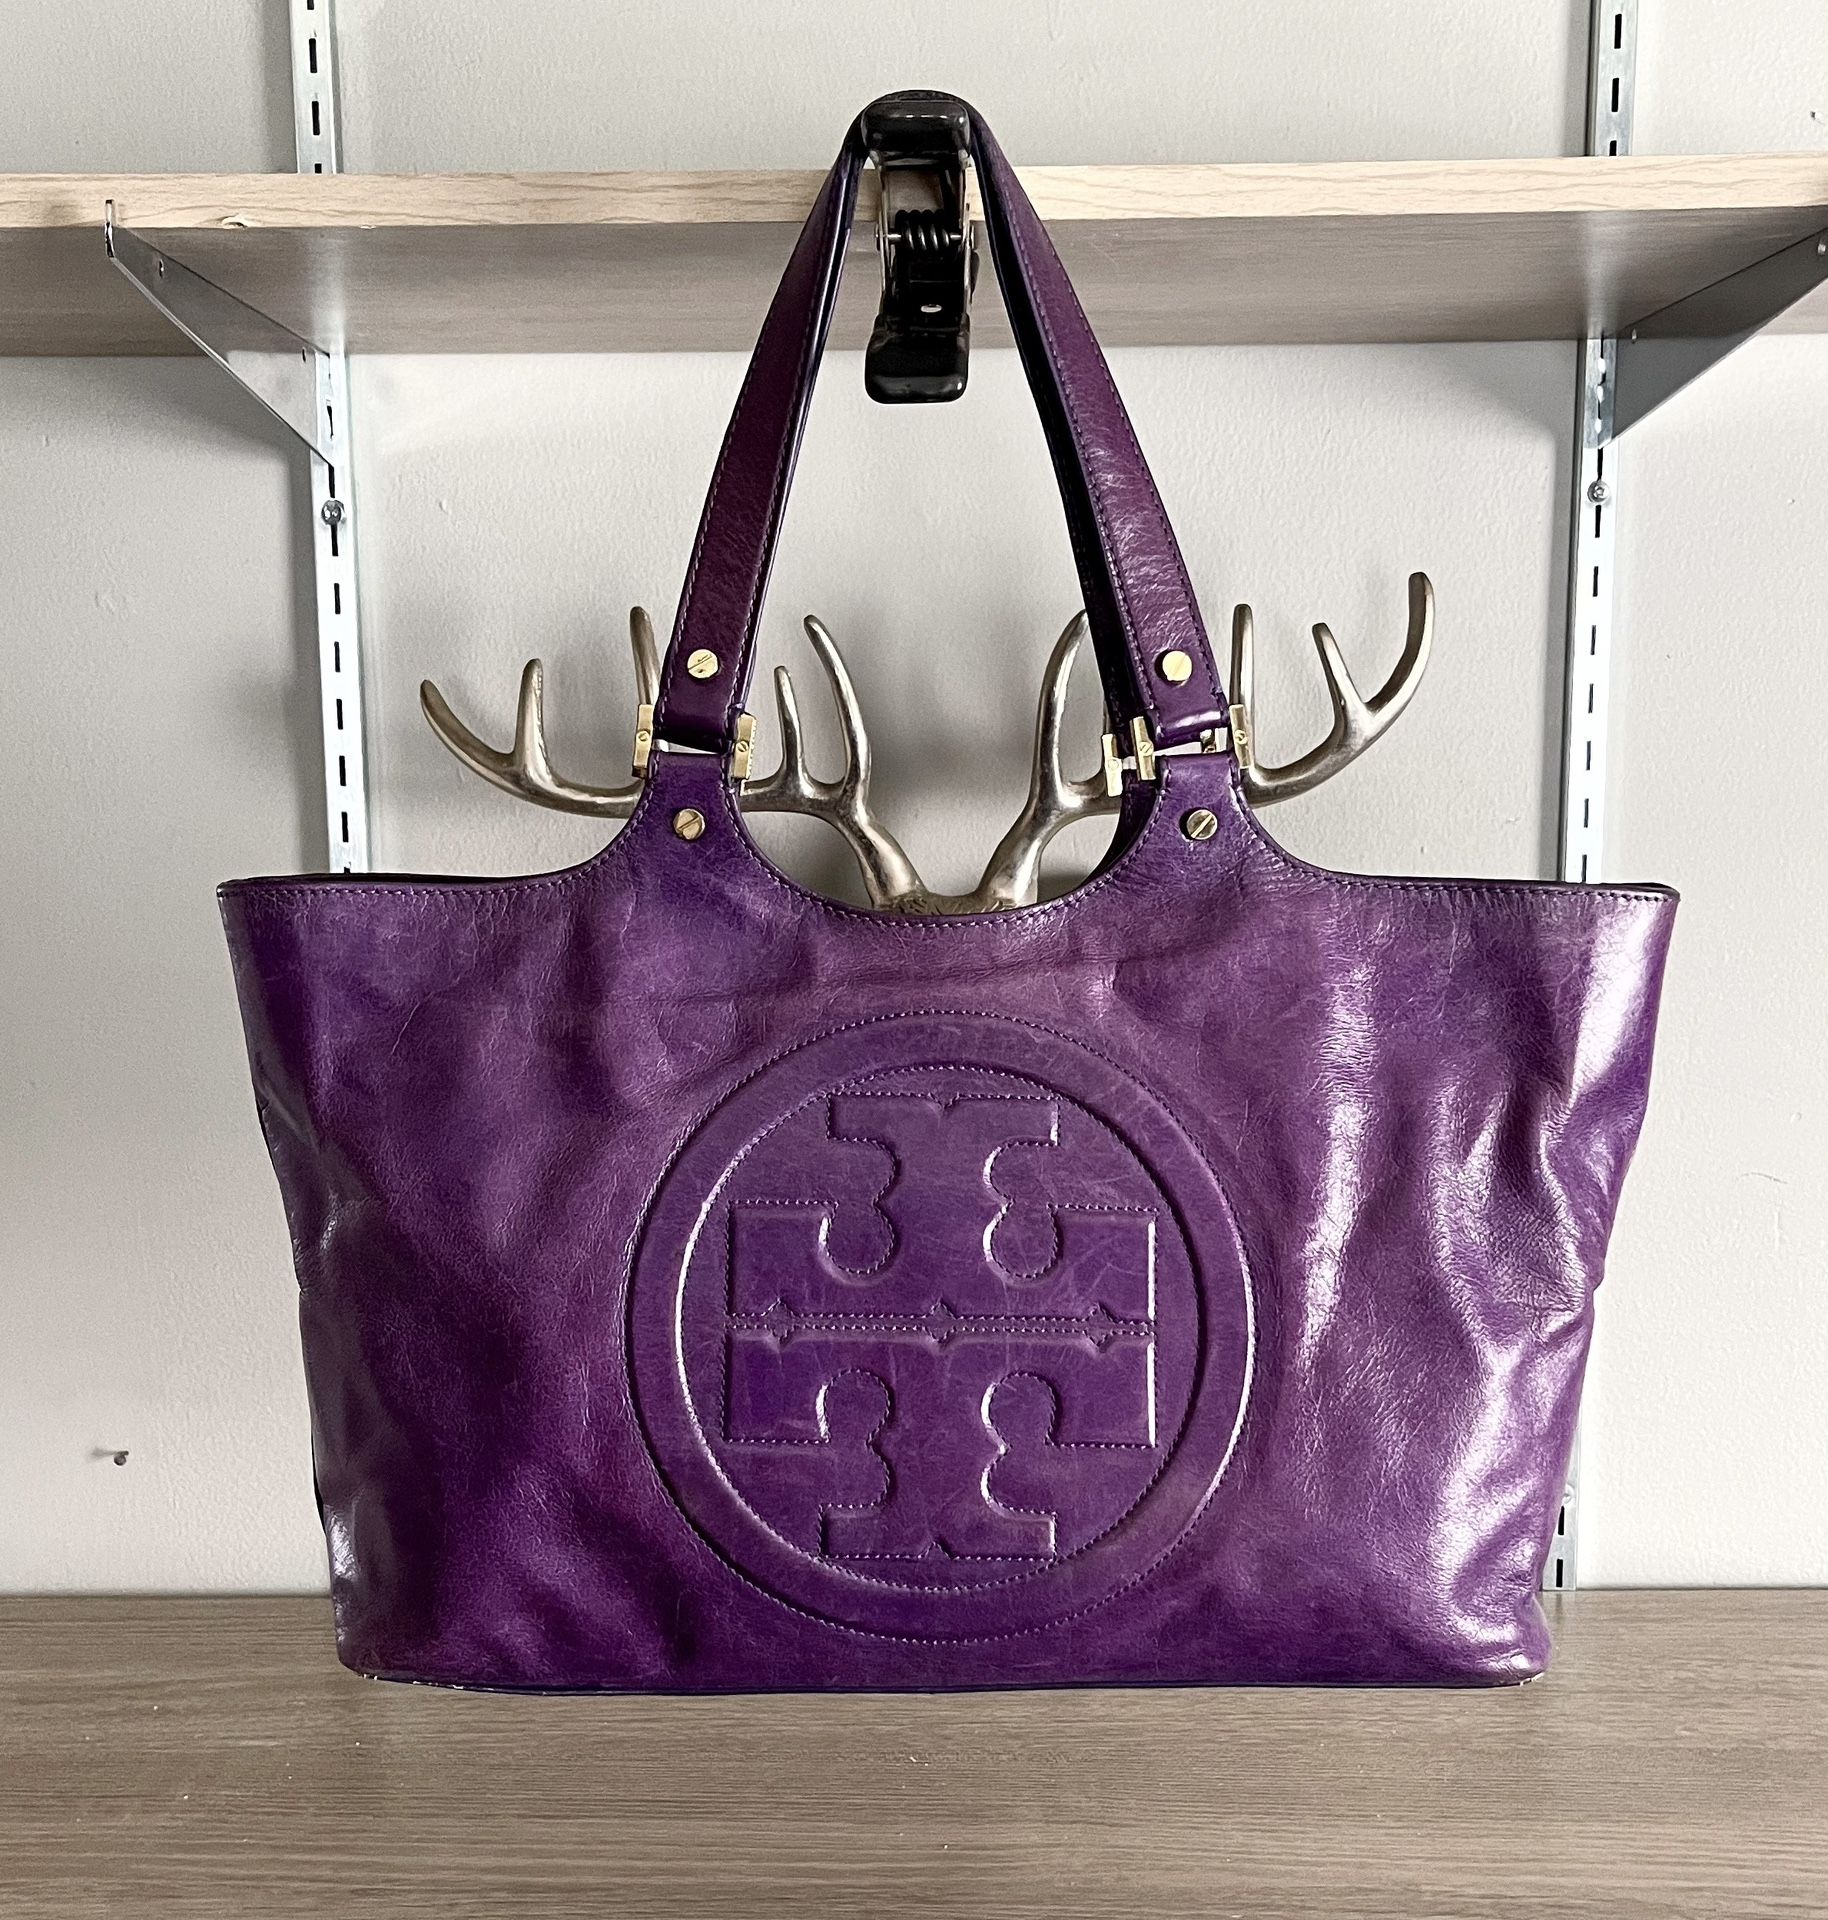 Women’s Vintage limited edition Tory Burch Bombe Glazed Leather Tote in eggplant. Retail $598. Excellent Used Condition! (EUC) Exterior: Gold tone har